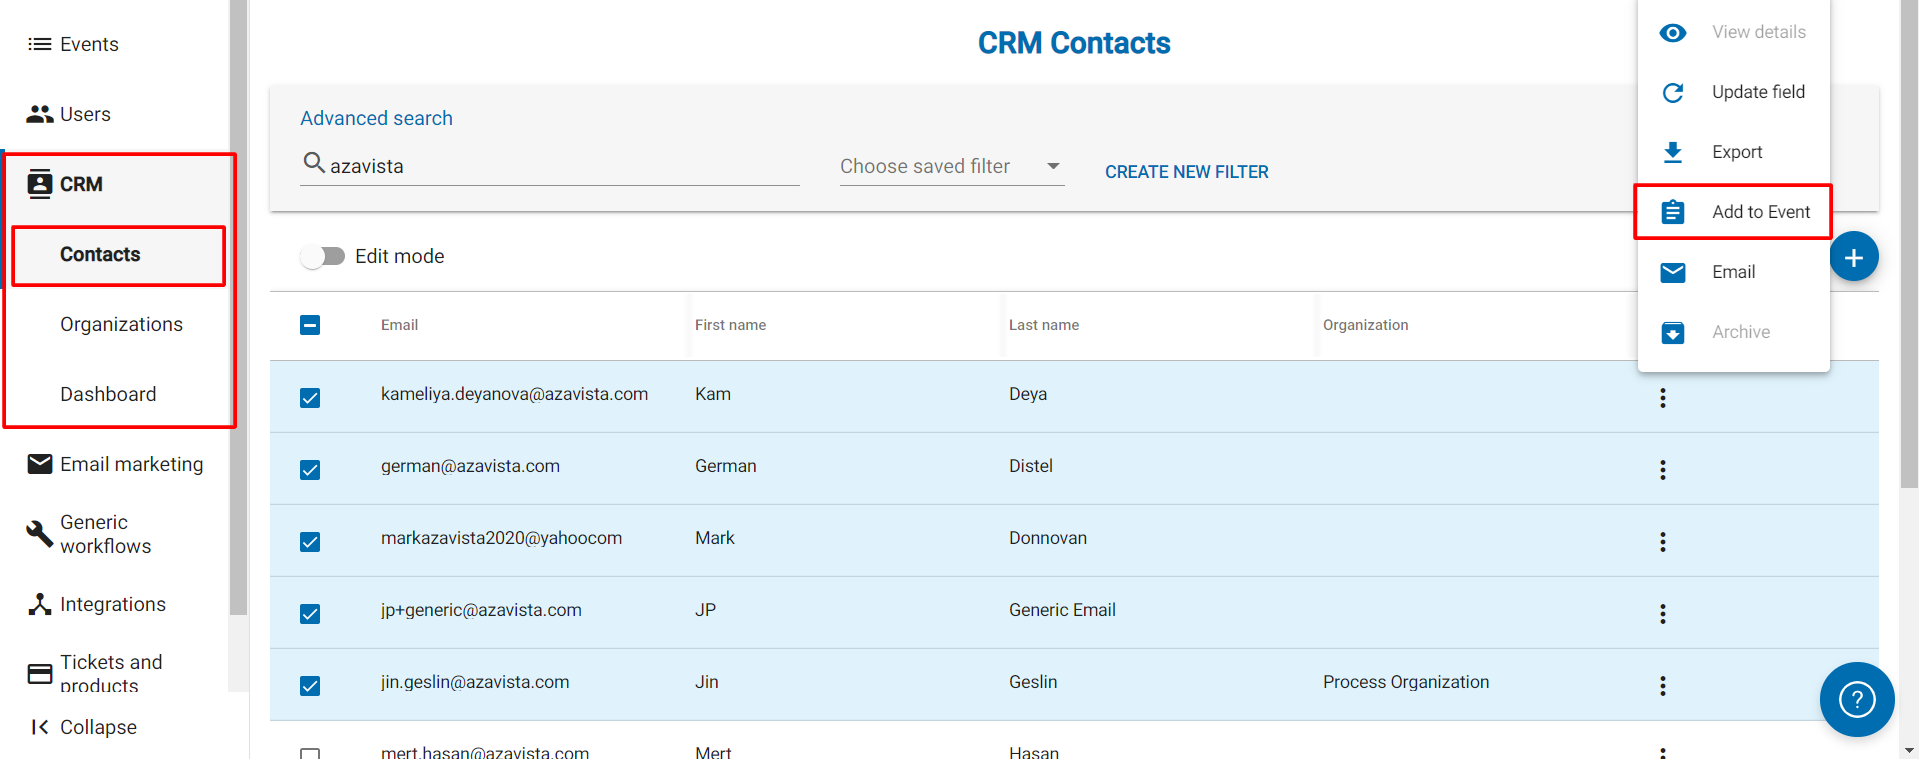 e_add_crm_contact_to_event.png